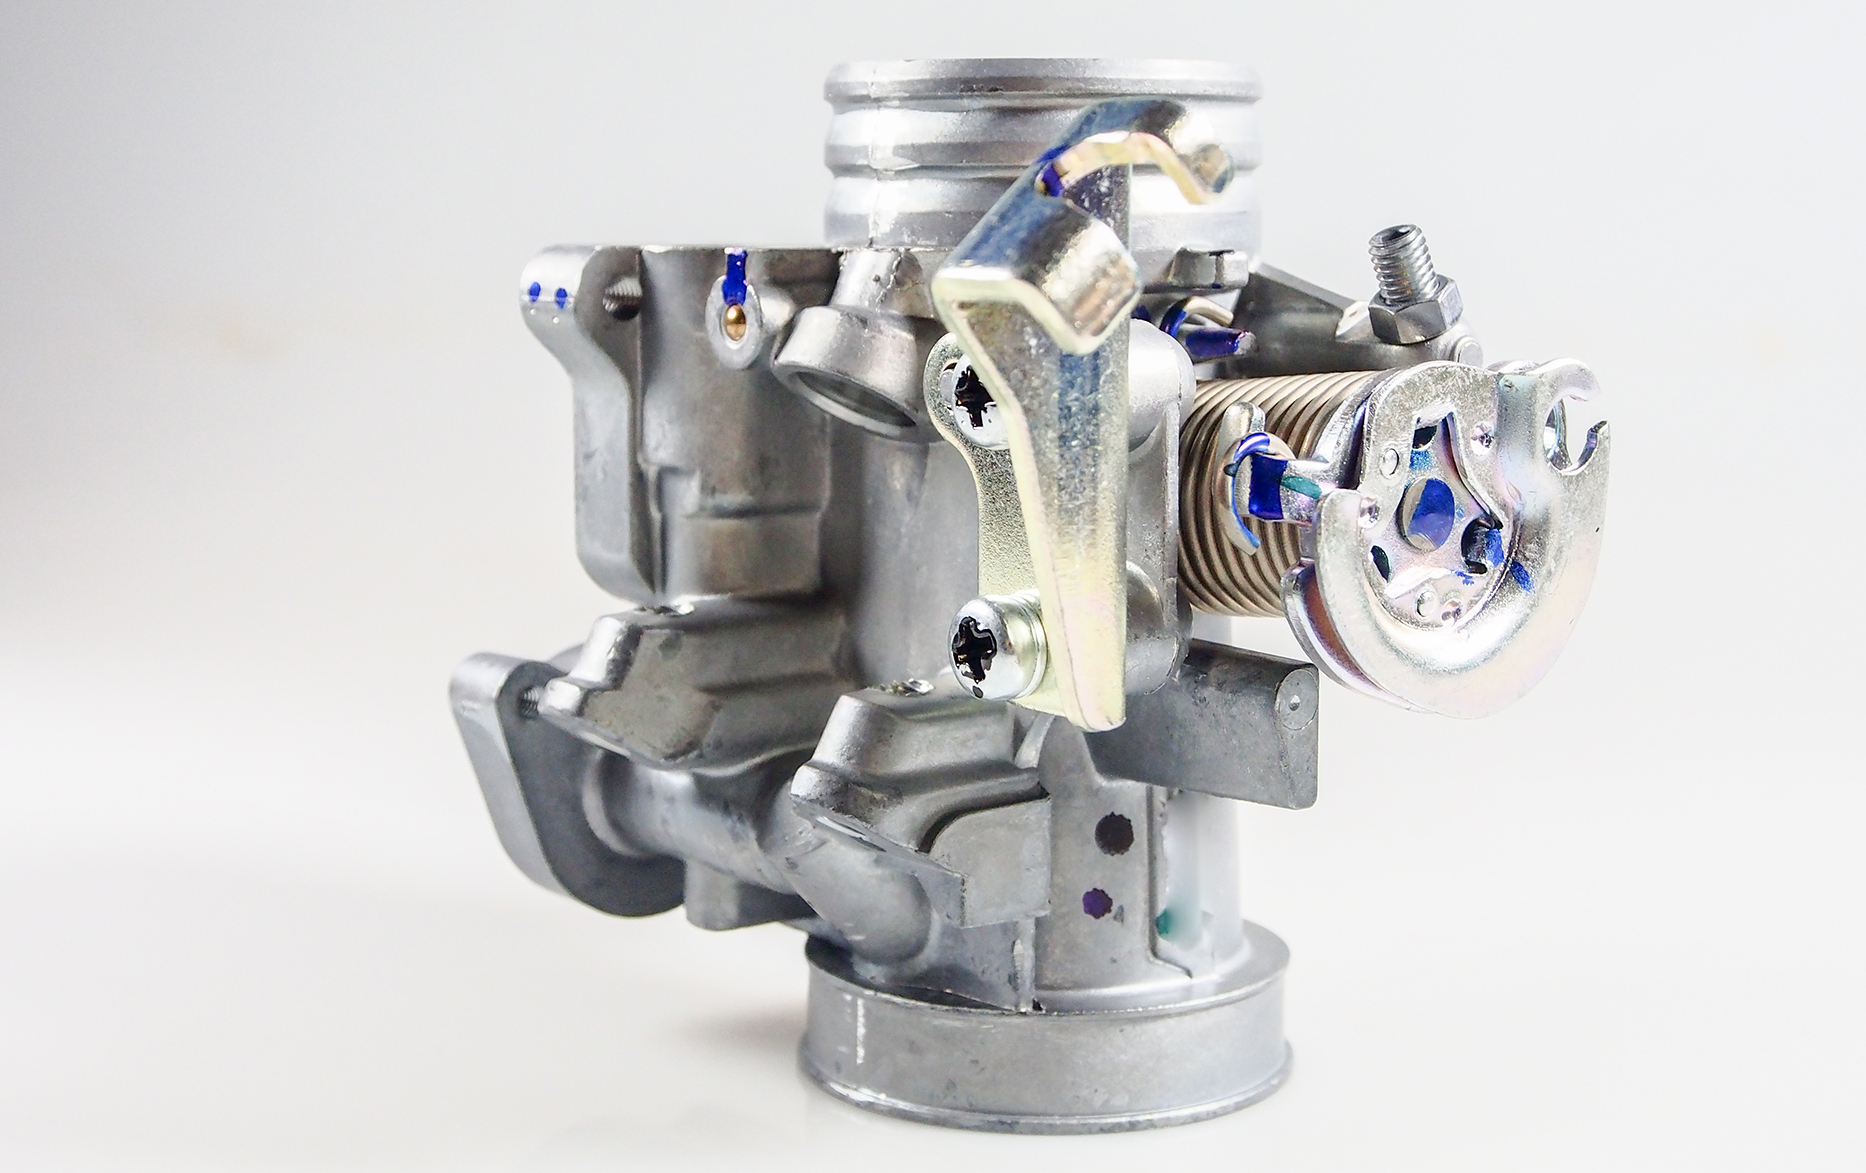 How to Clean a Carburetor